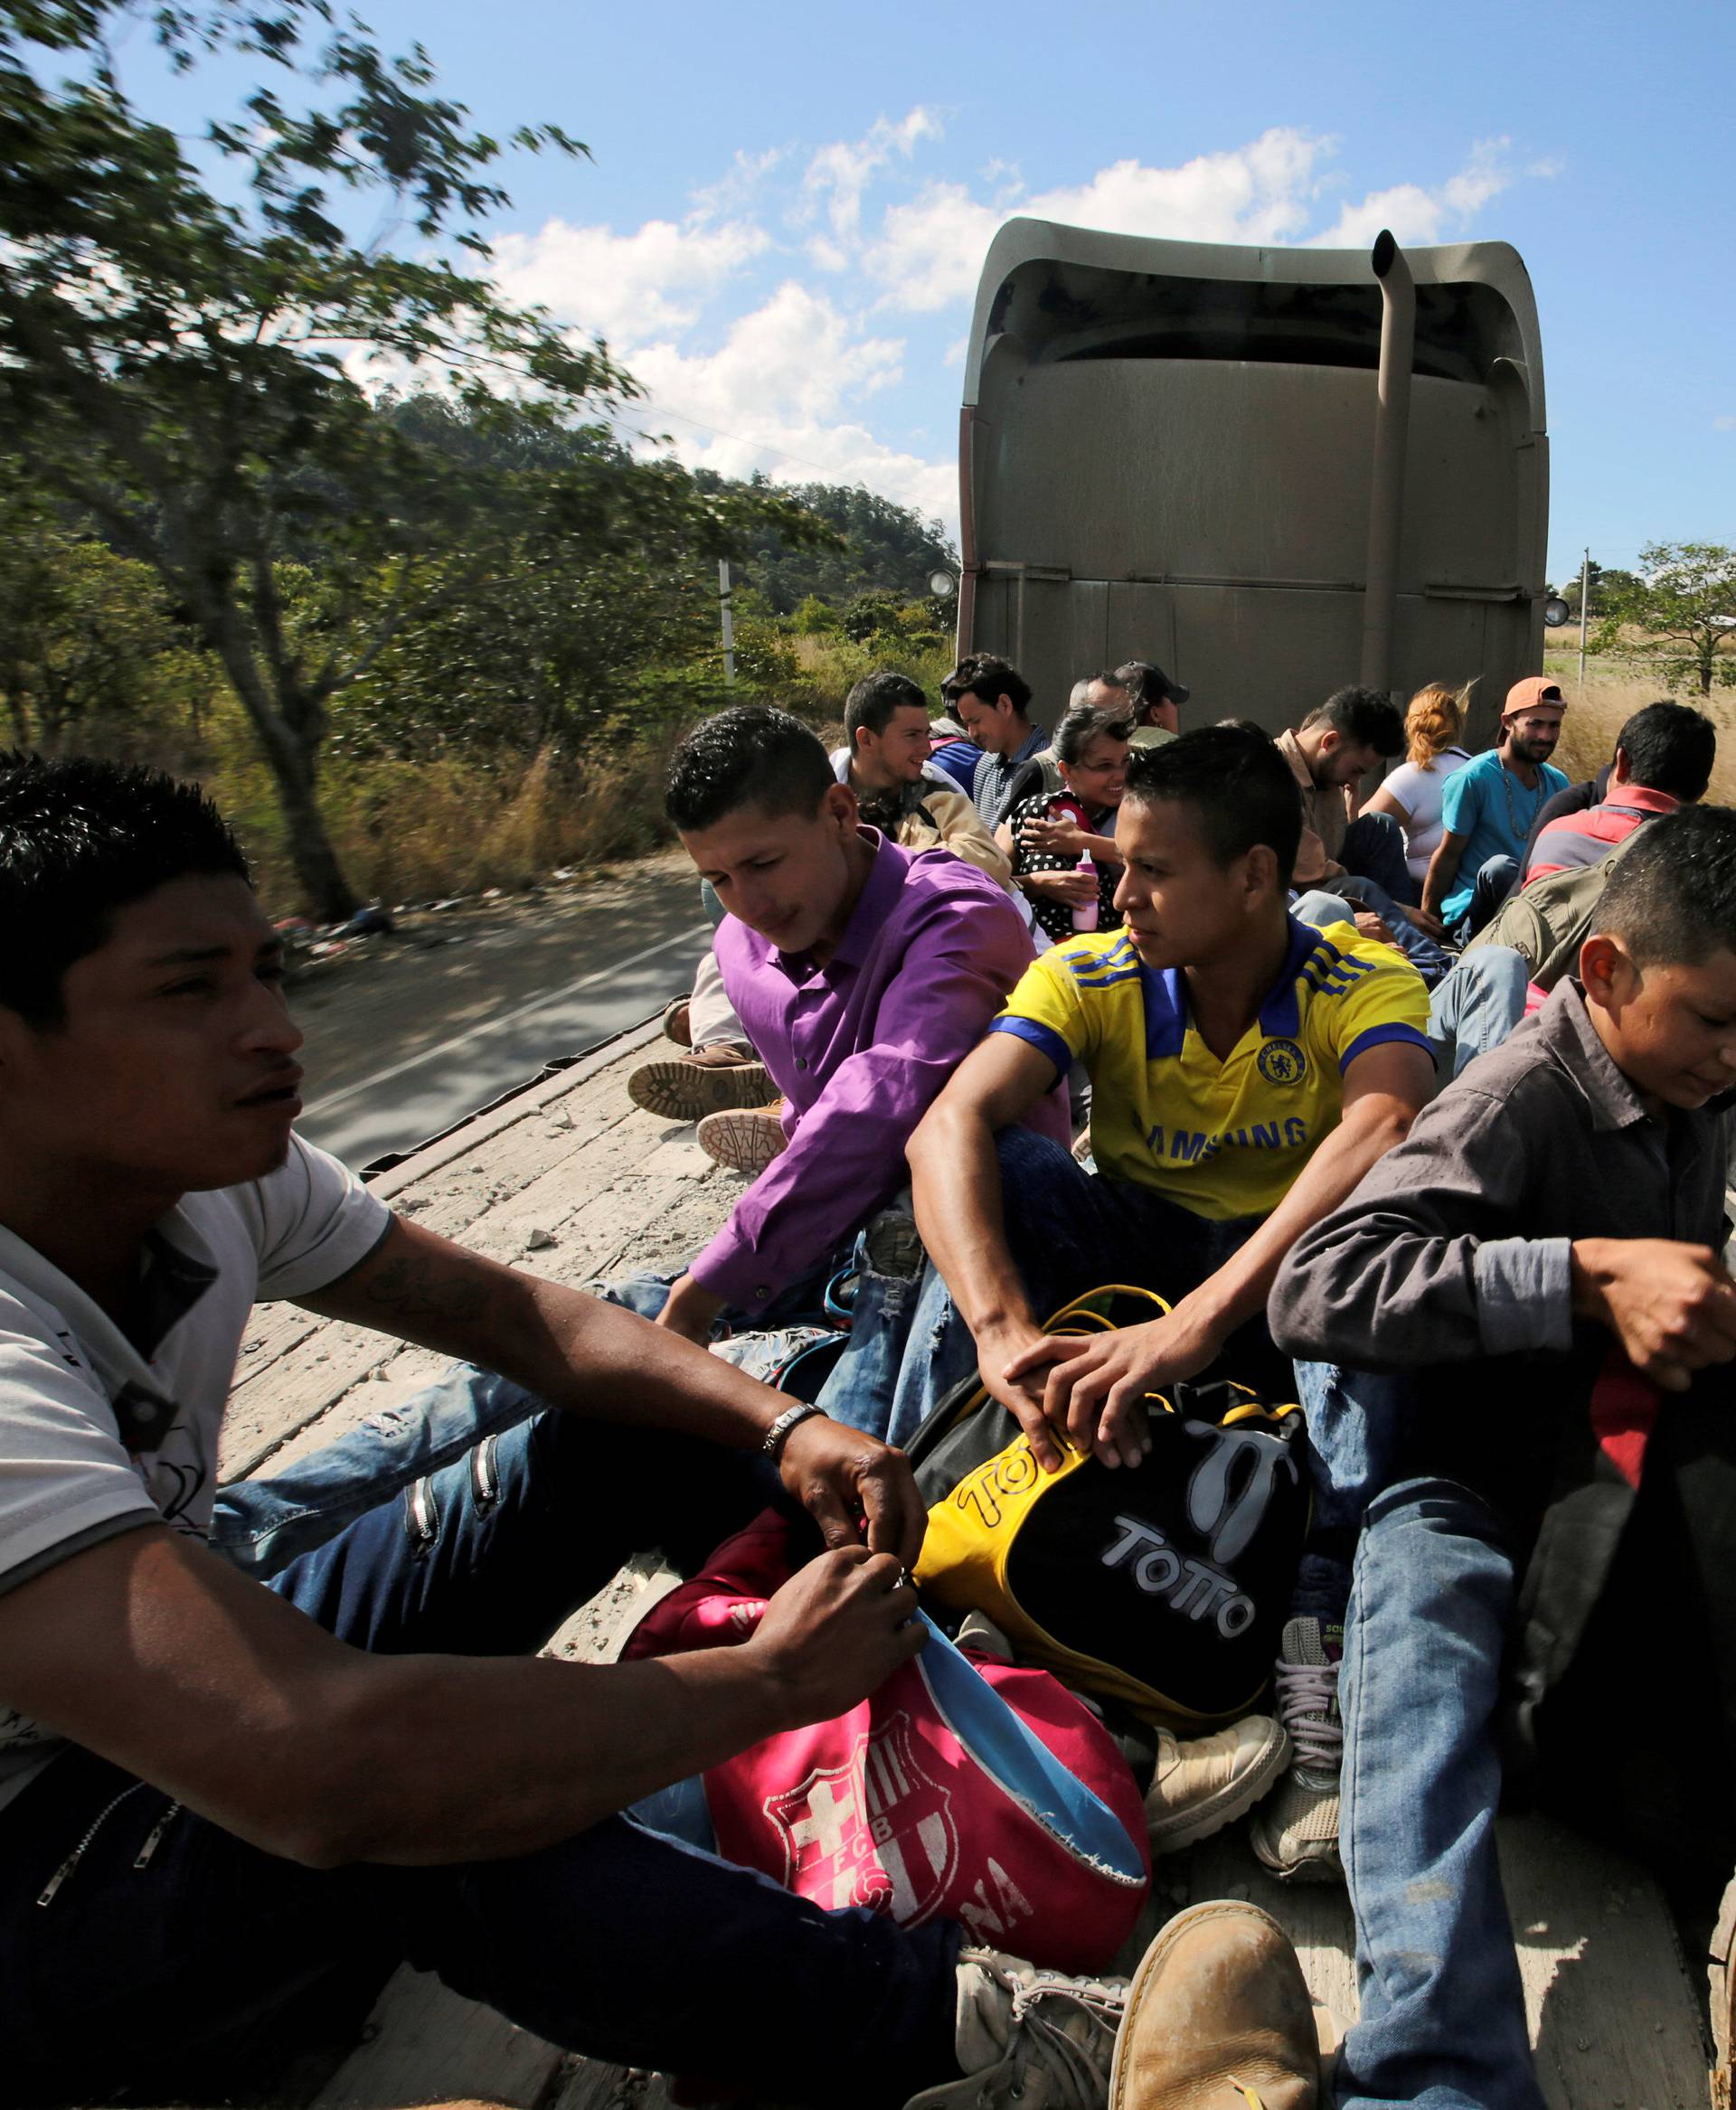 Hondurans, part of a new caravan of migrants travelling towards the United States, ride in a trailer as they hitch a ride in Cucuyagua